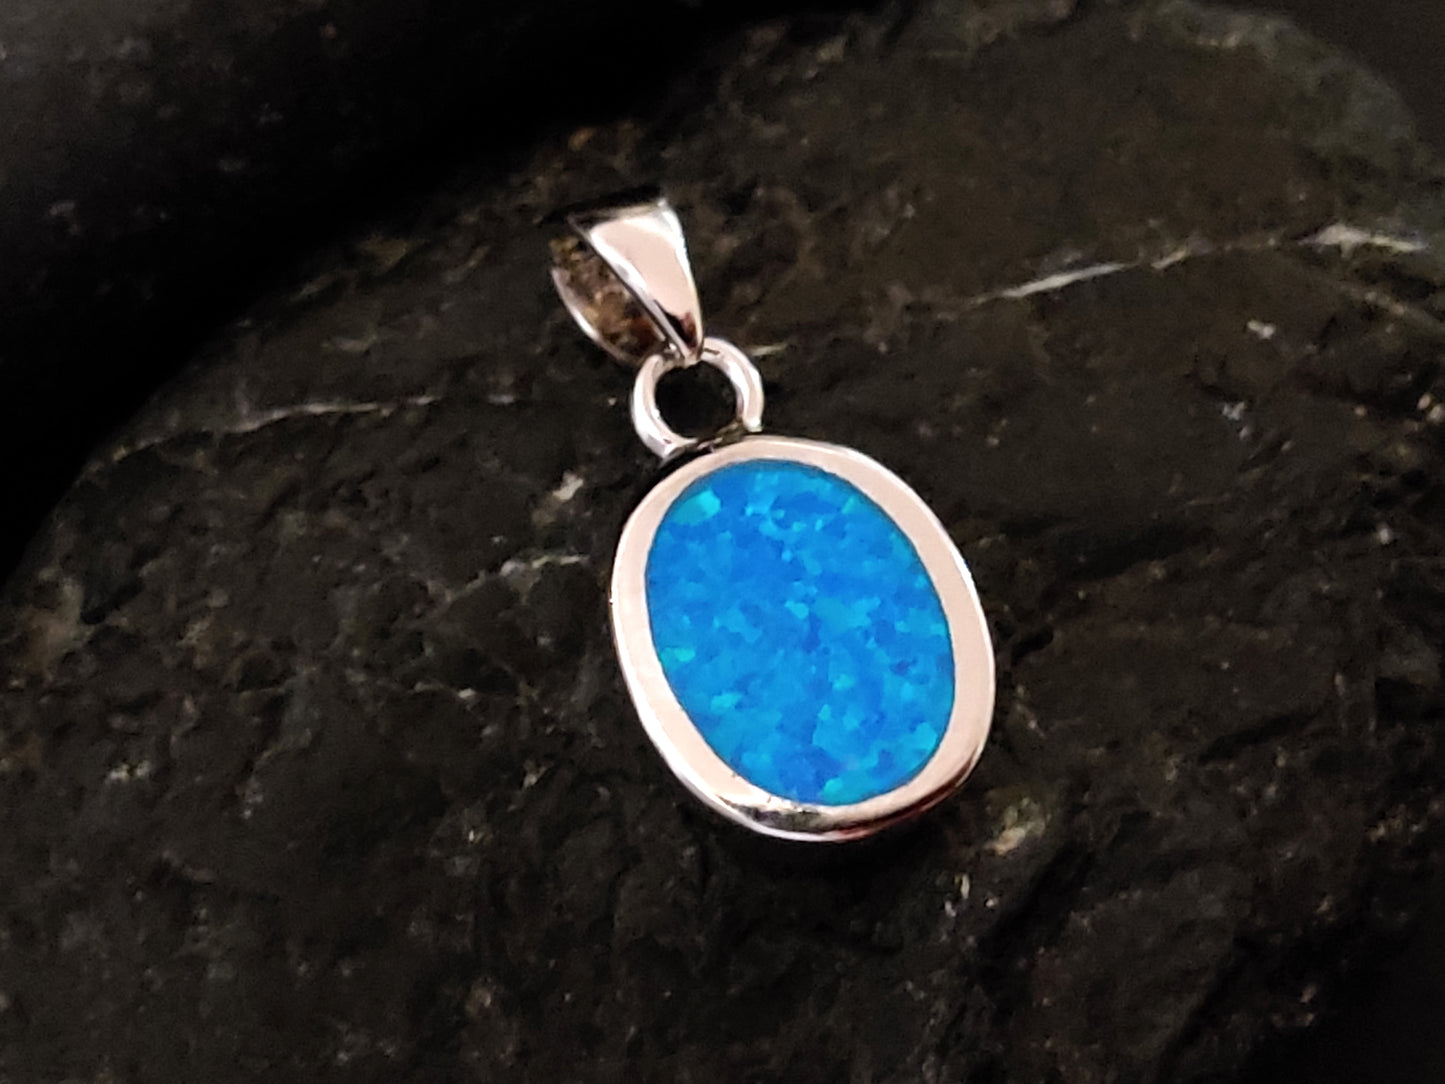 This sterling silver pendant features an enchanting oval-shaped blue opal stone, measuring 13x10mm. Inspired by Greek design, it exudes elegance and timeless beauty.